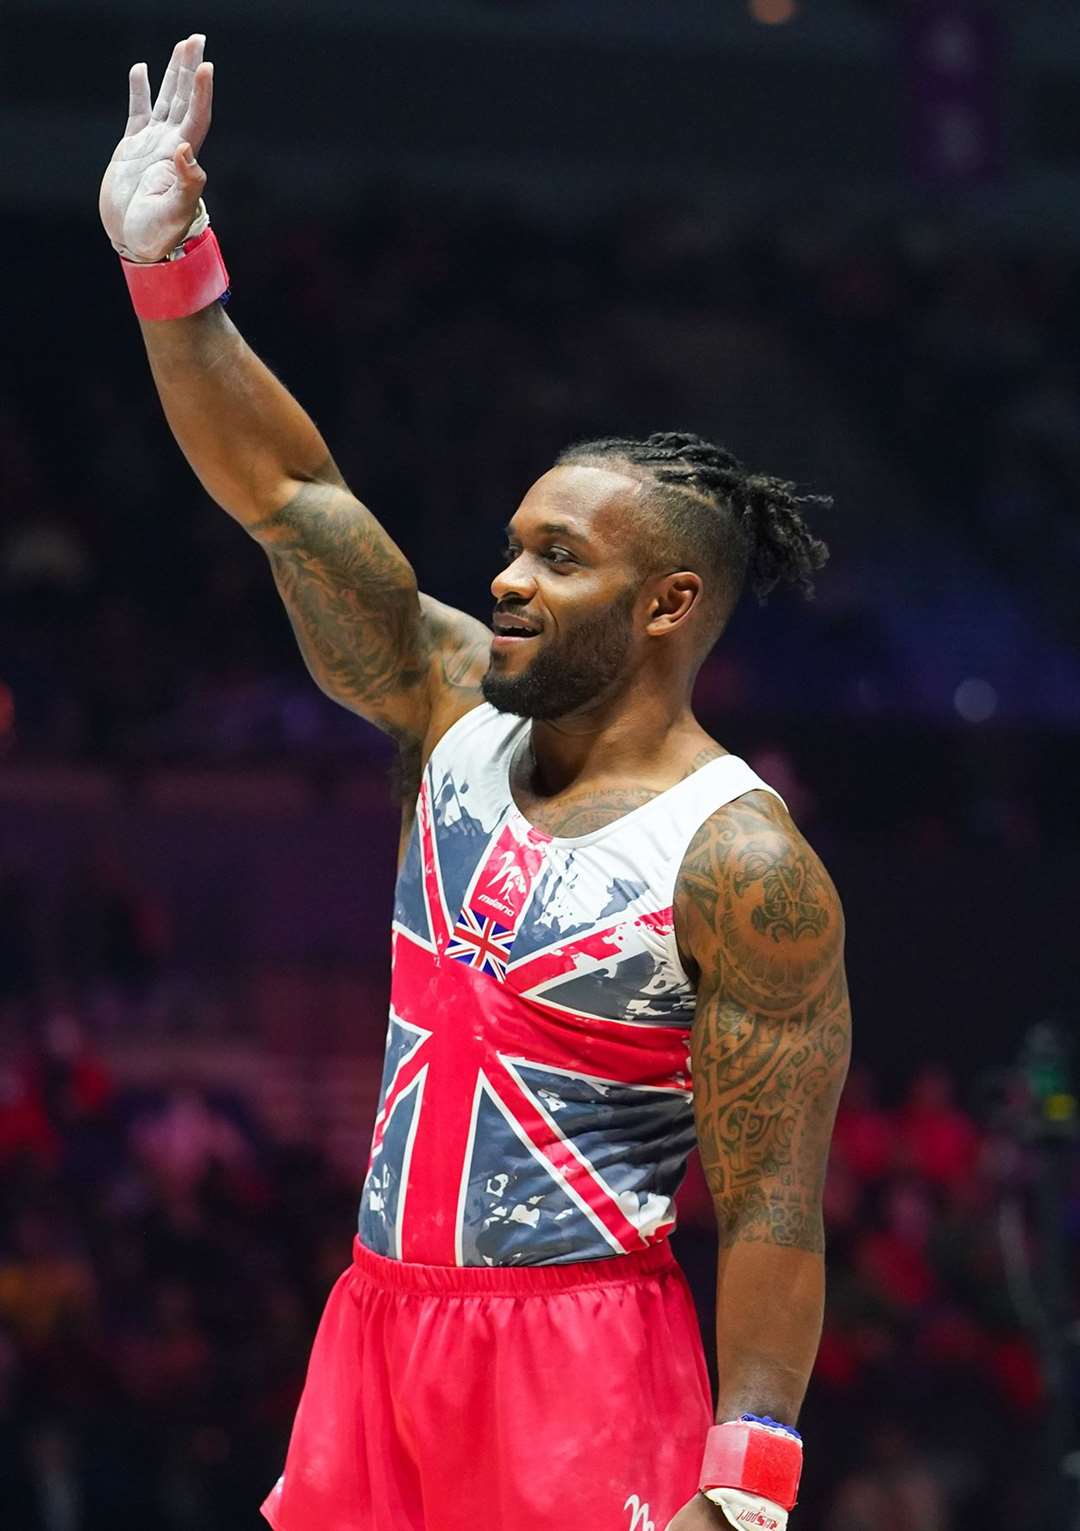 Maidstone's Courtney Tulloch has added rings bronze to his team medal at the World Gymnastics Championships. Picture: British Gymnastics